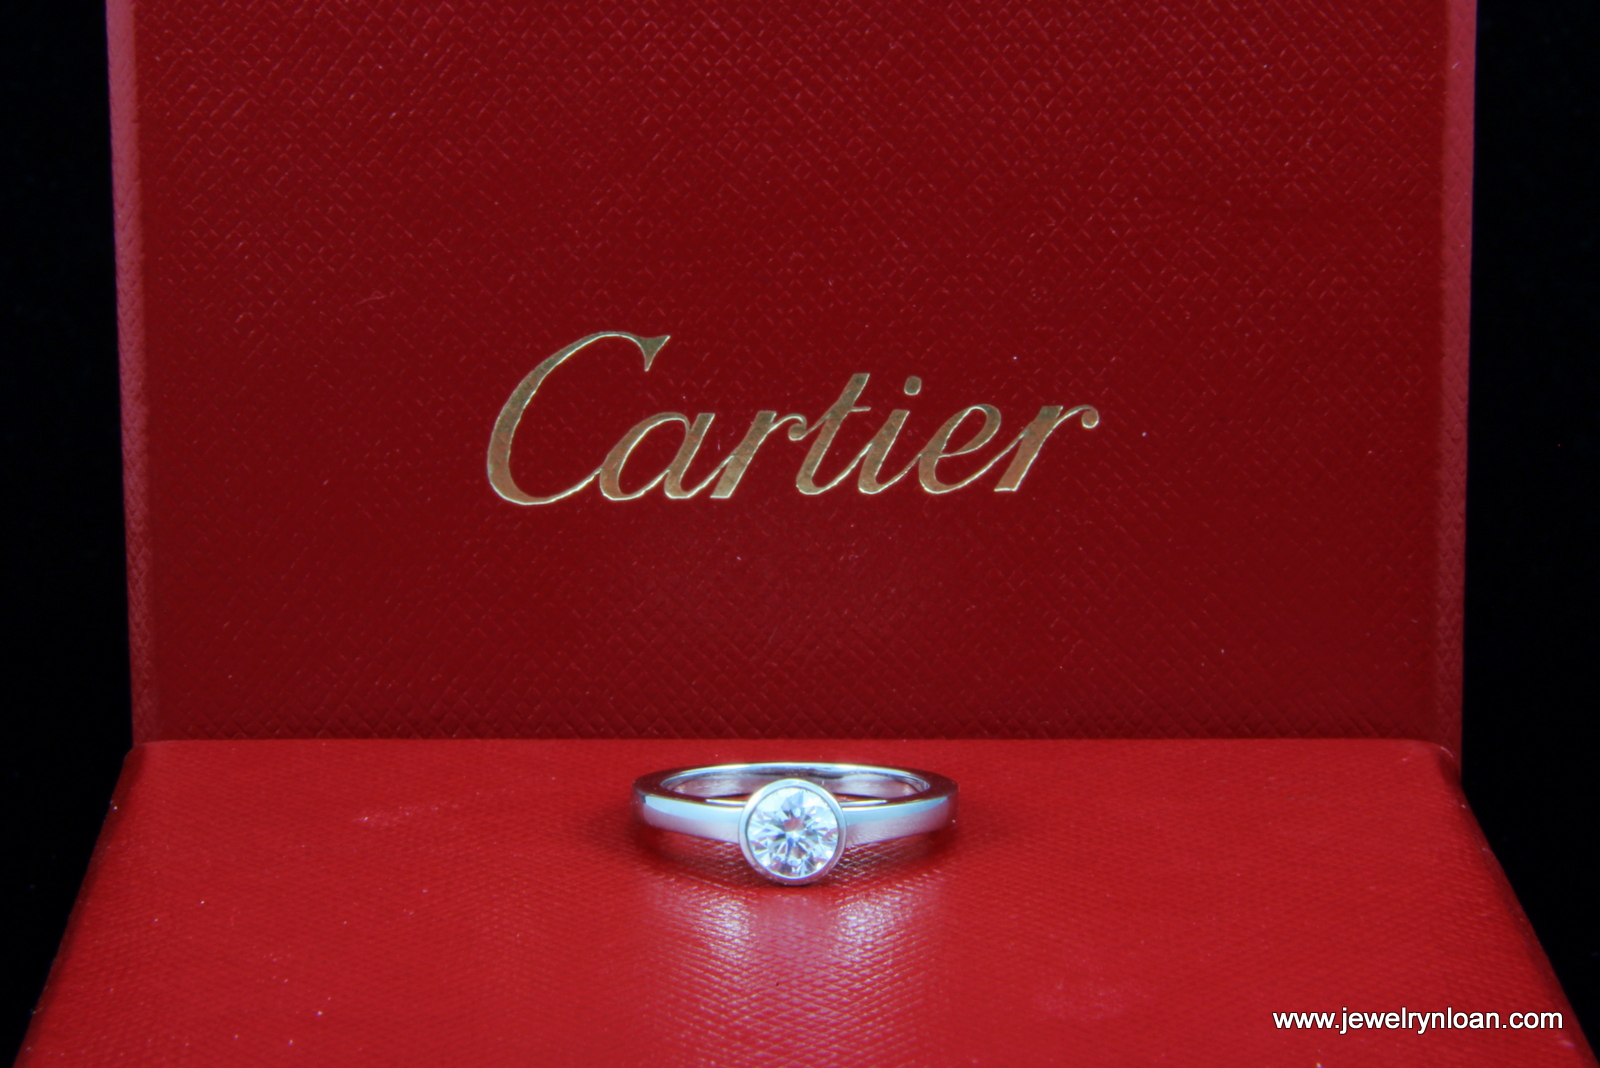 Cartier Engagement Ring Orange County